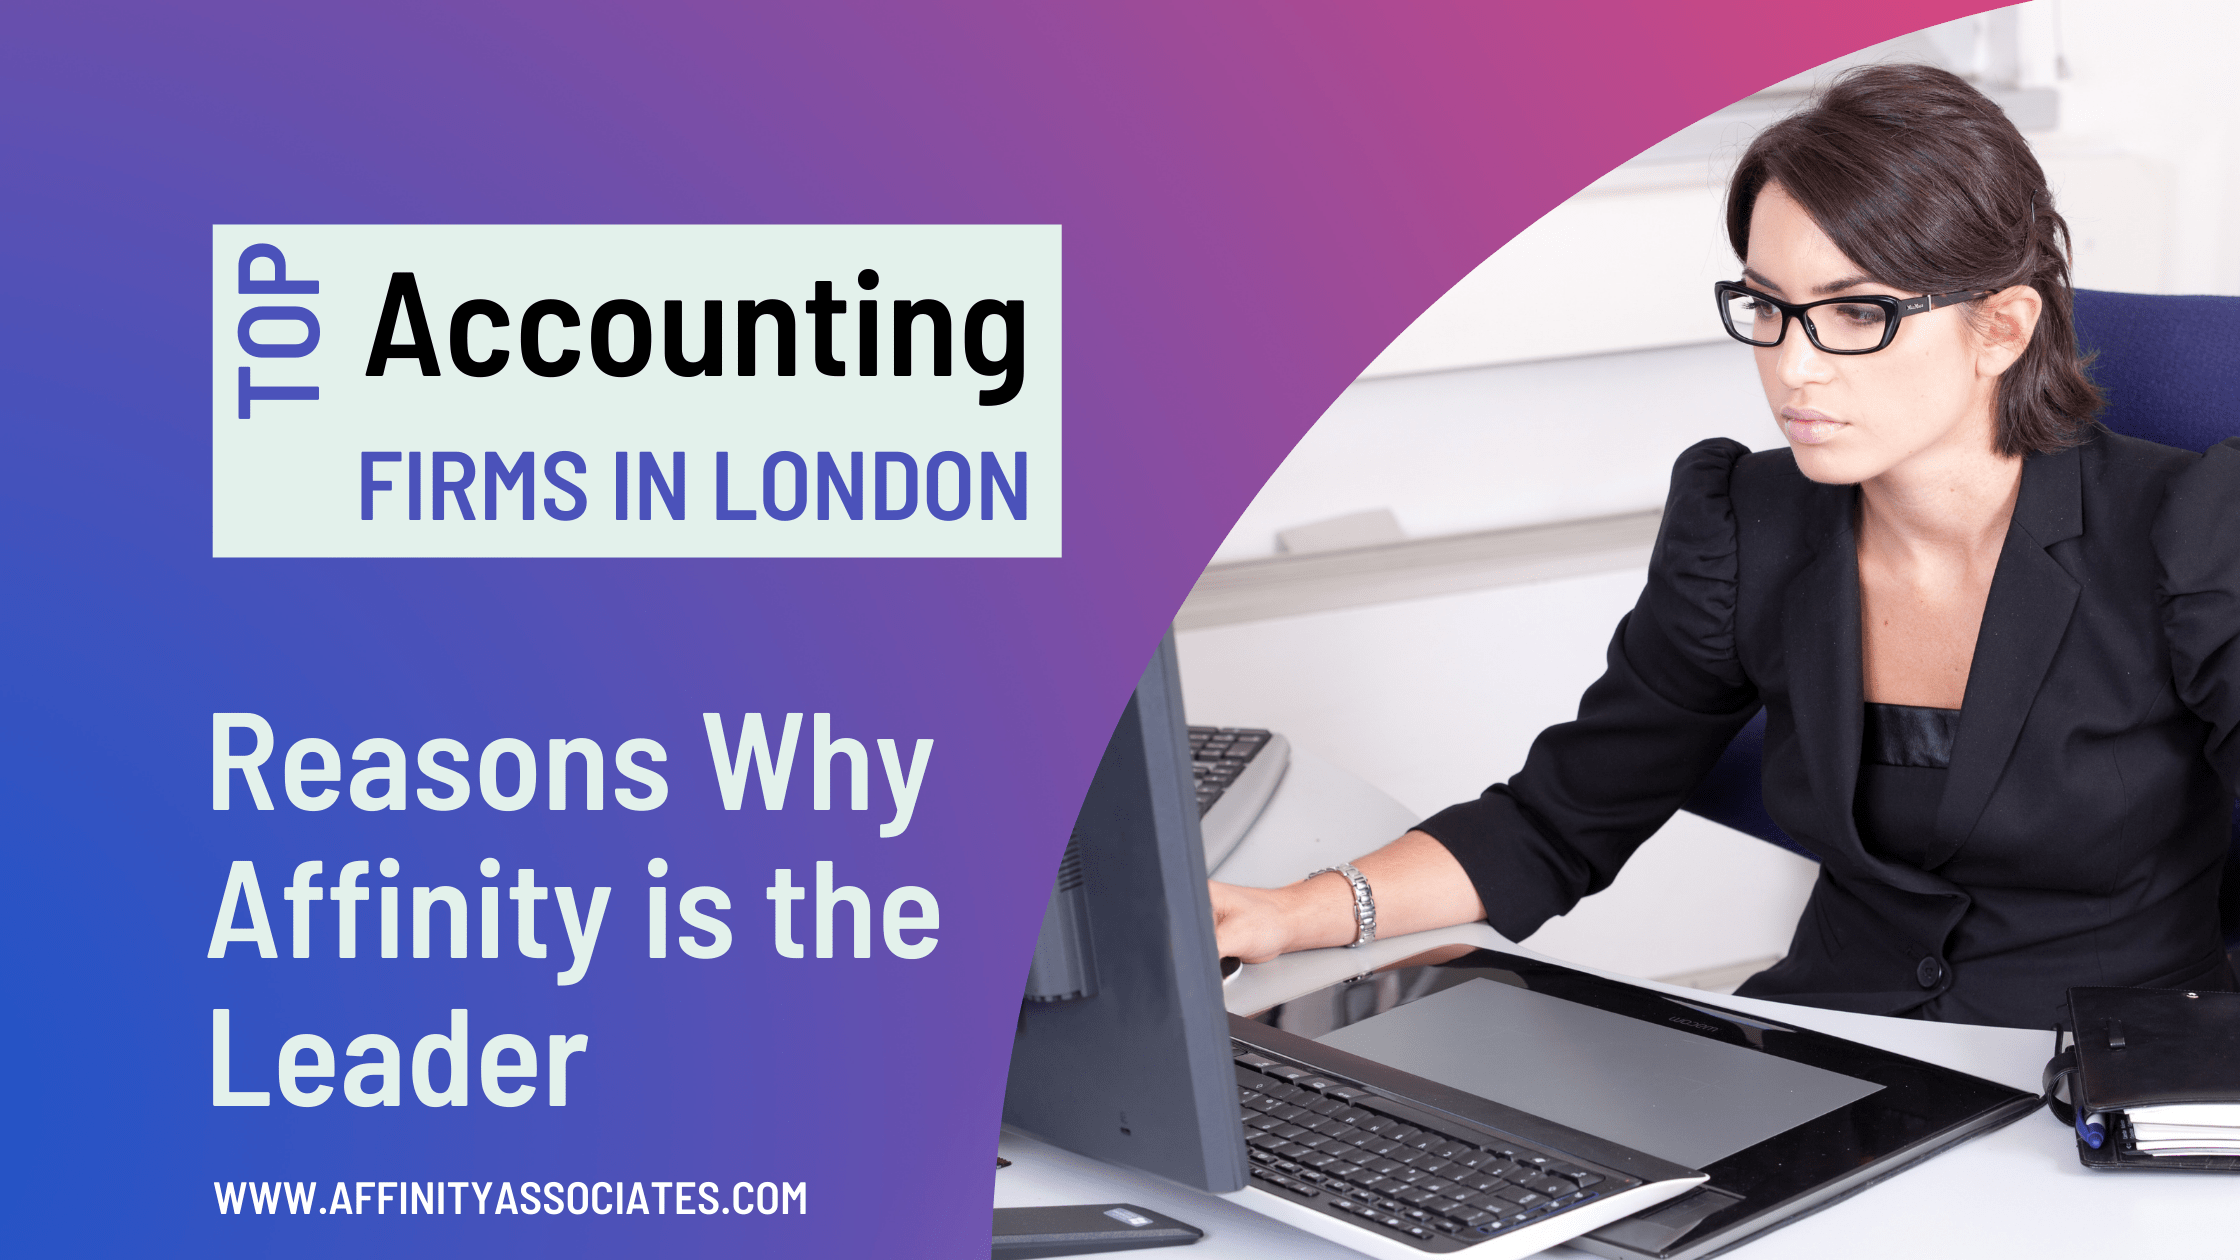 Top Accounting Firms in London – Reasons Why Affinity is the Leader